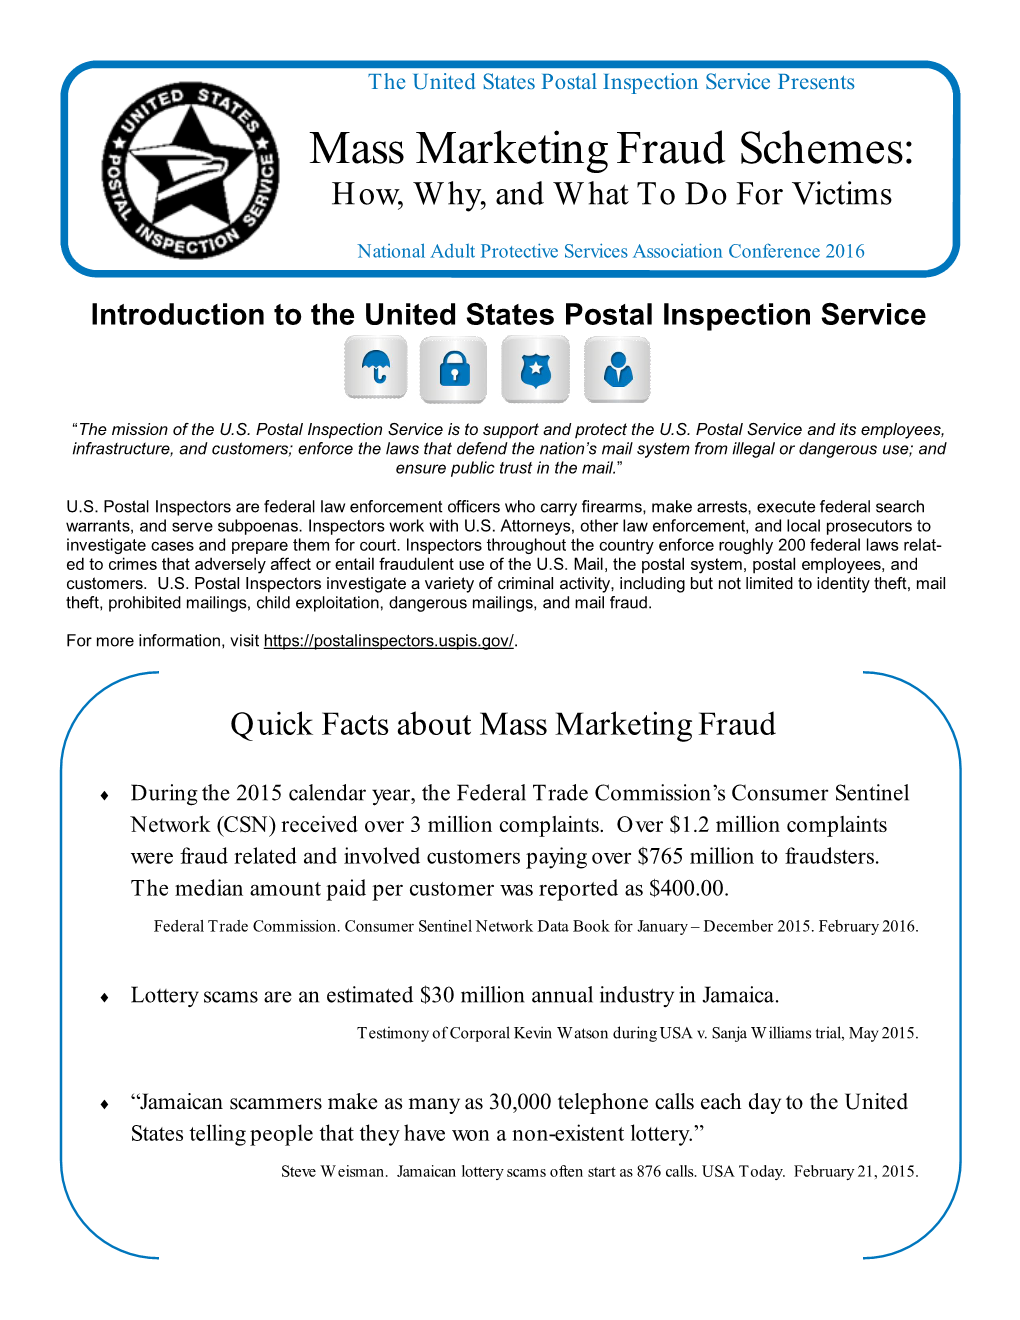 Mass Marketing Fraud Schemes: How, Why, and What to Do for Victims